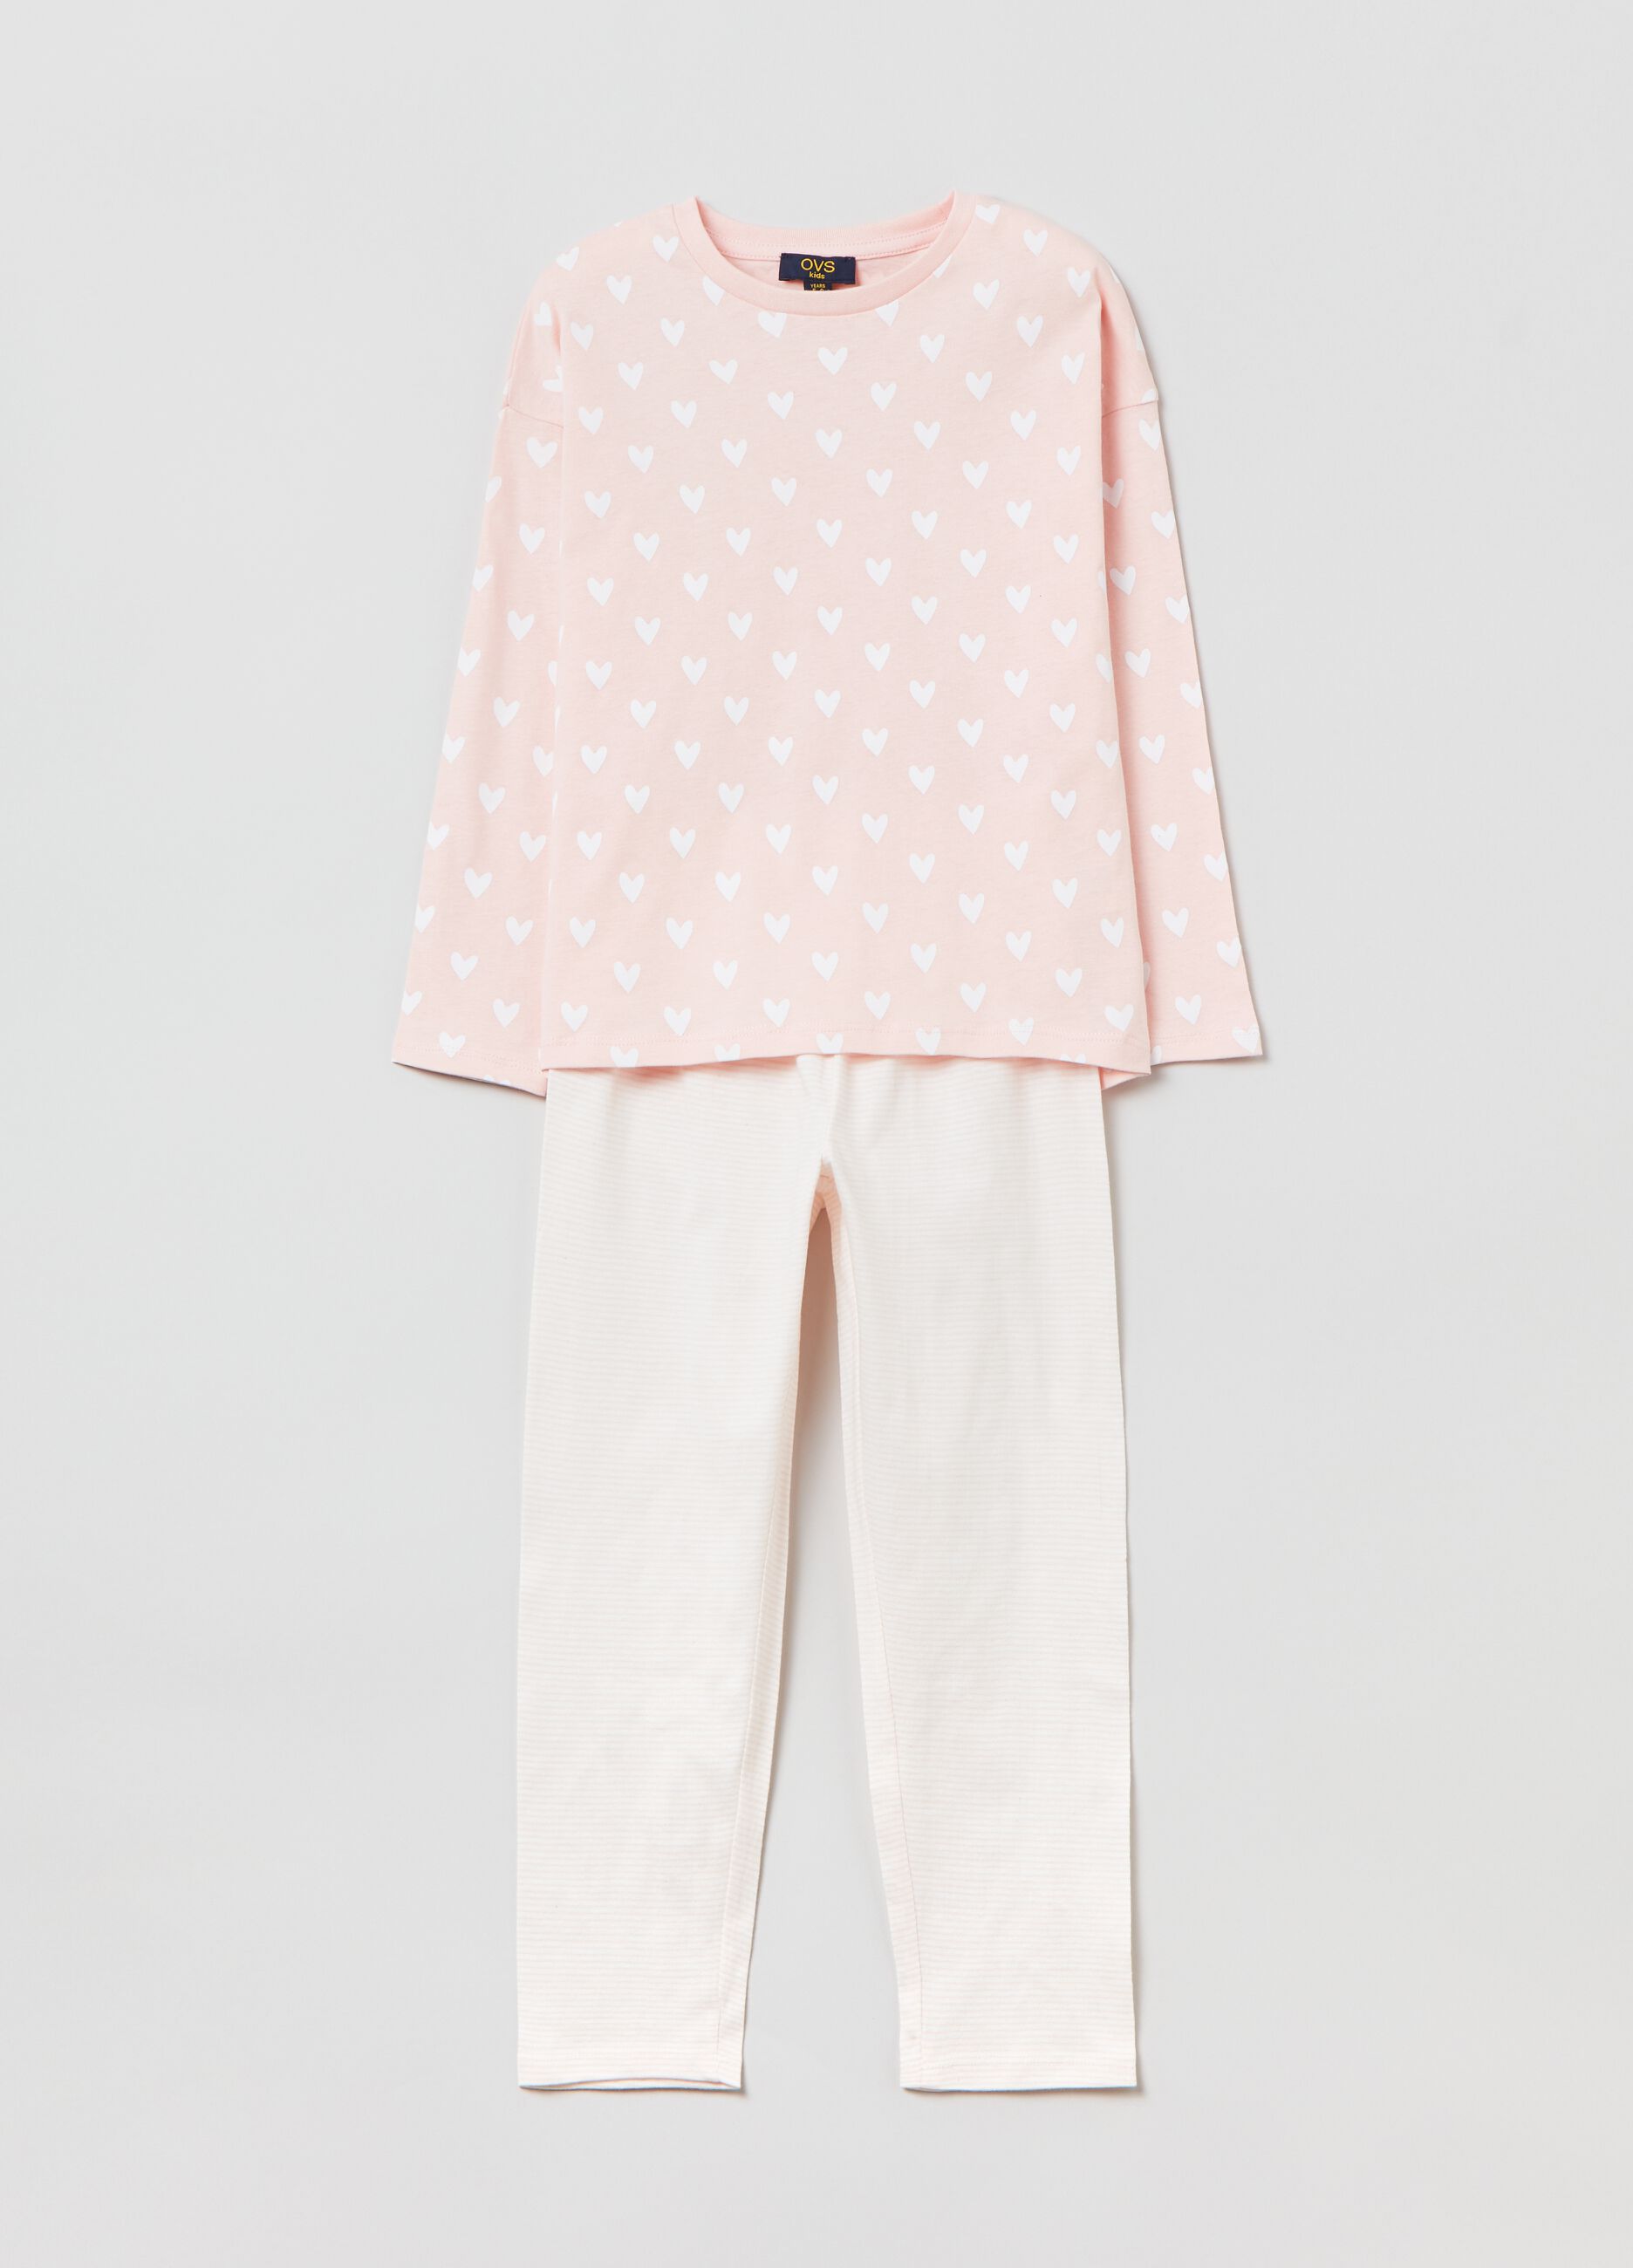 Long pyjamas in cotton with heart and stripe print